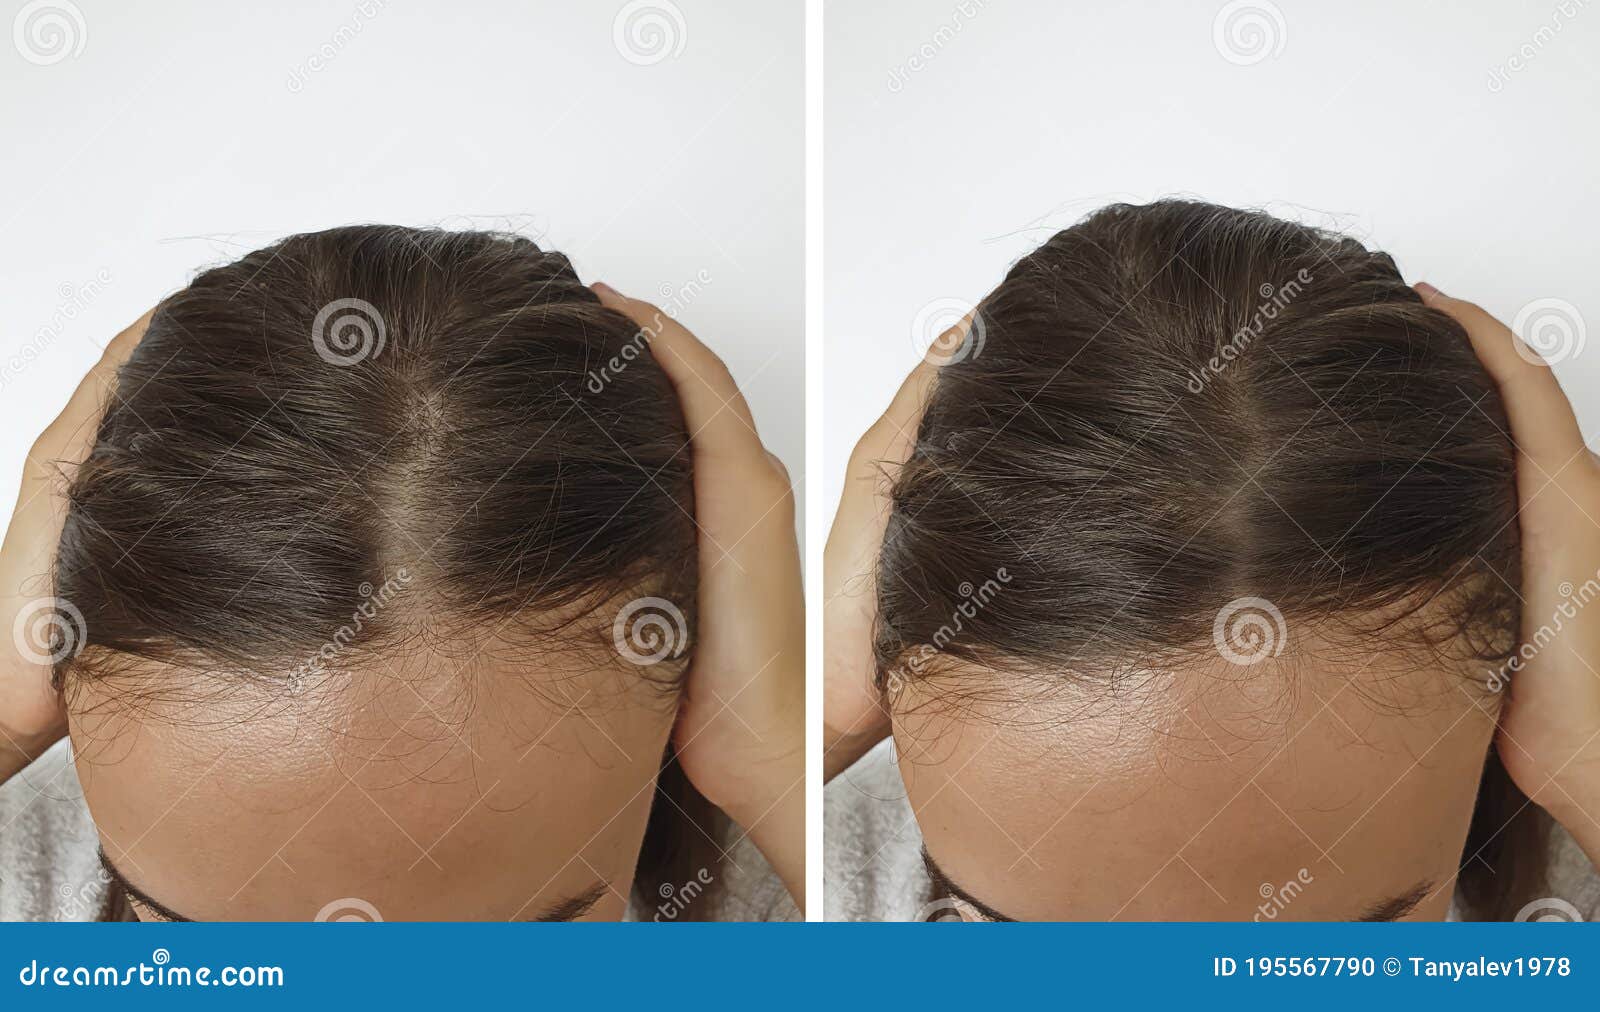 woman baldness hair before  after treatment